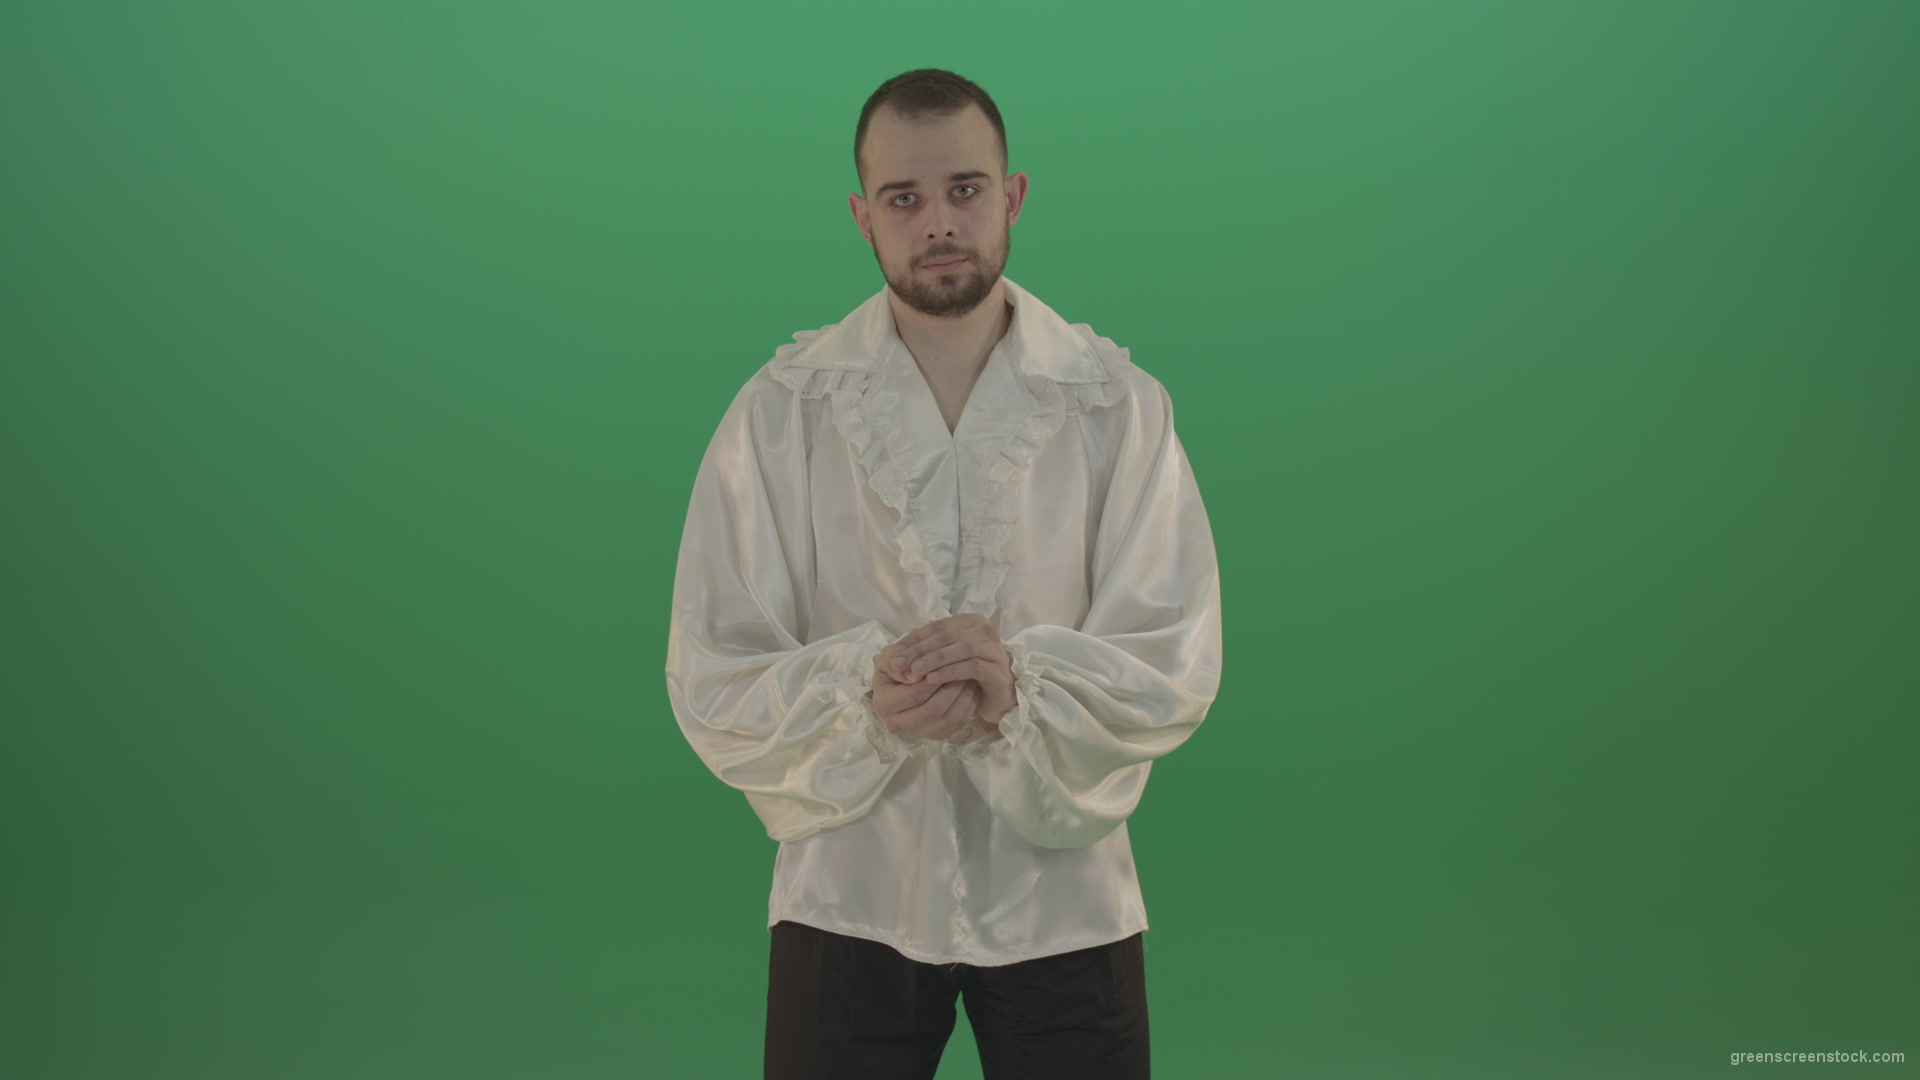 Boy-gives-flower-squeezing-in-the-sleeves-elegantly-in-hand-isolated-on-green-screen_001 Green Screen Stock